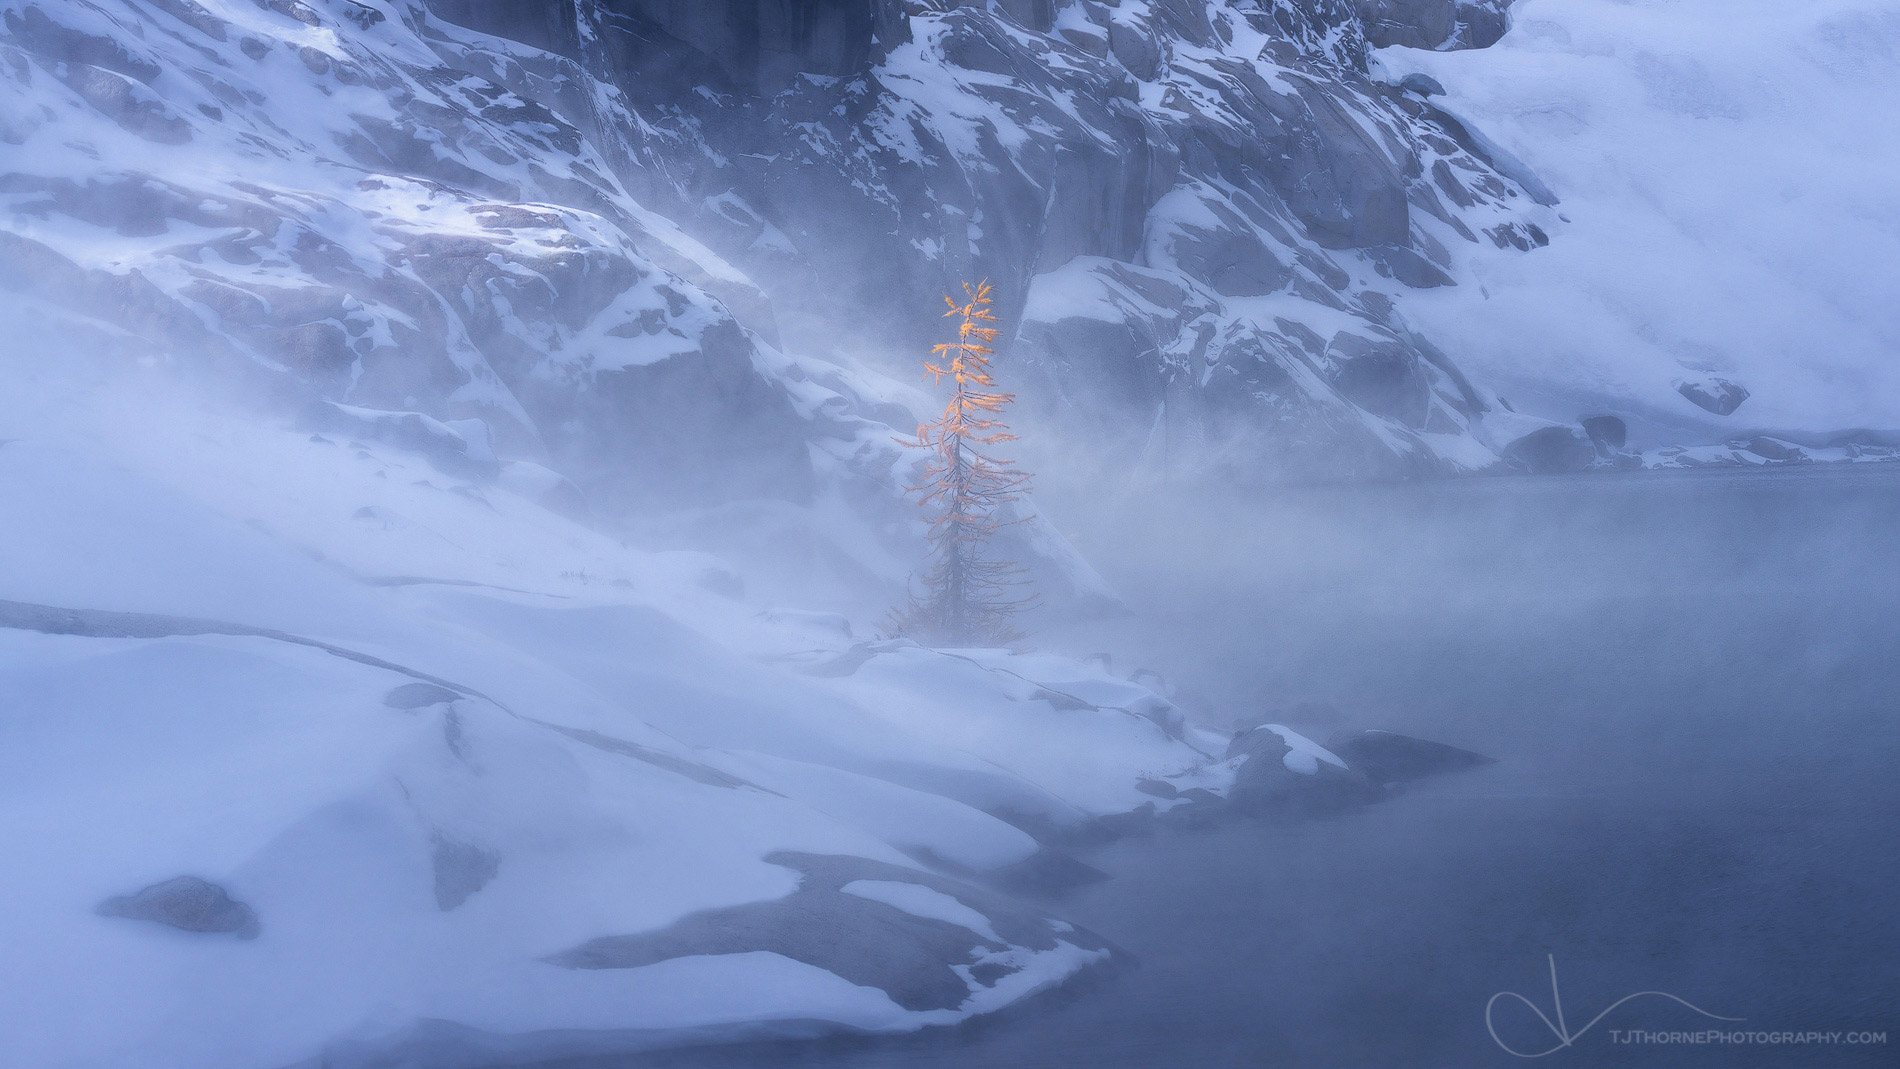 A lone larch tree in The Enchantments strives to bask in the light while it endures a snowy gust of wind. Stand strong little...